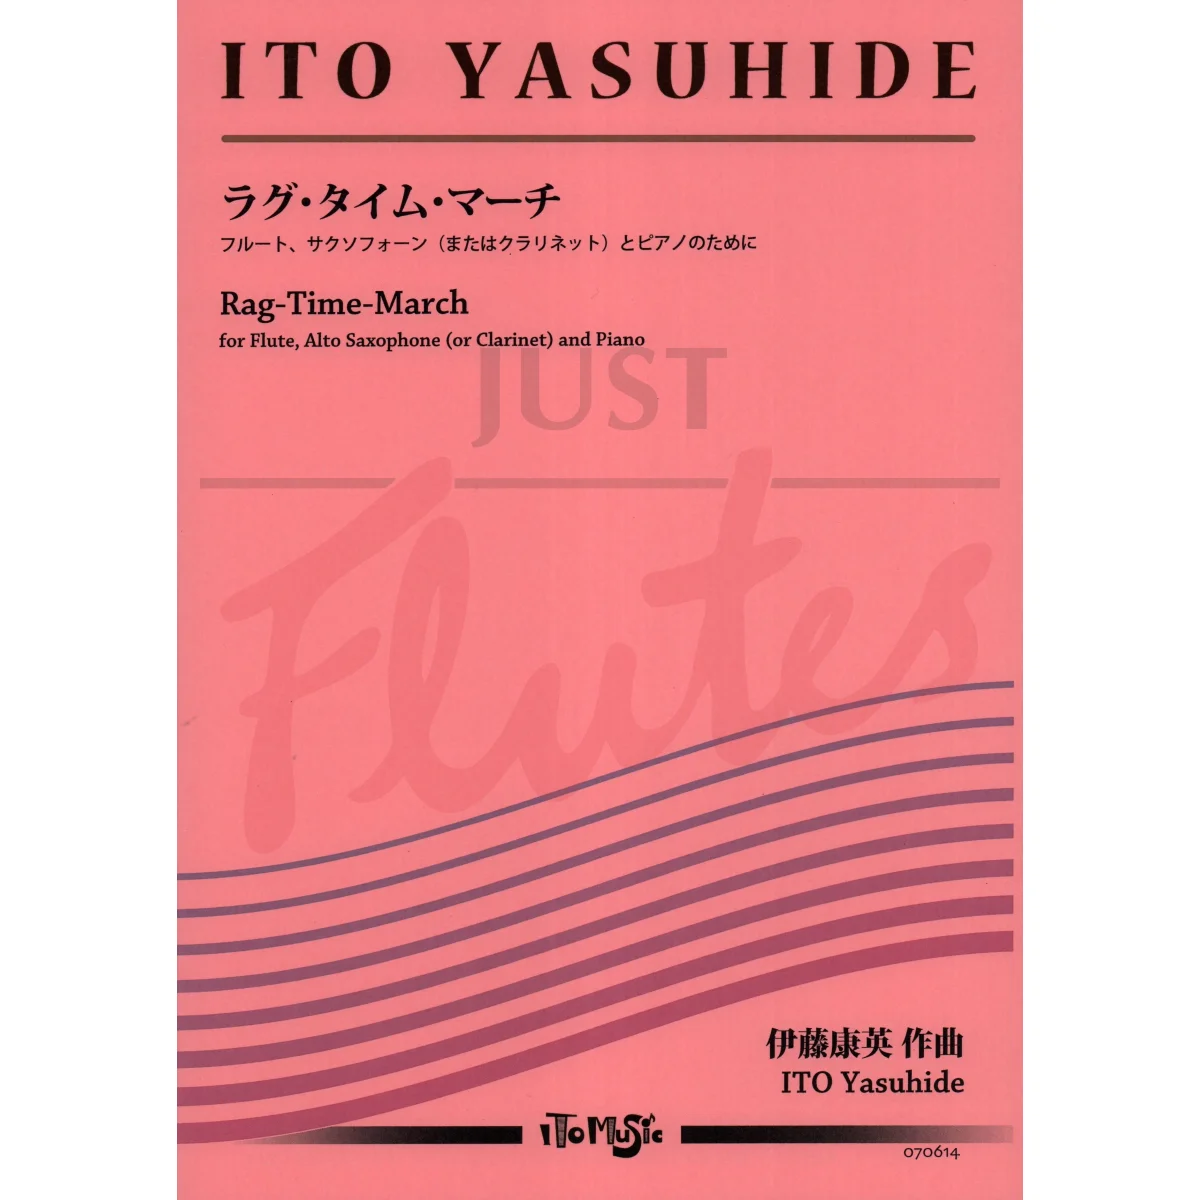 Rag-Time-March for Flute, Alto Saxophone (or Bb Clarinet) and Piano